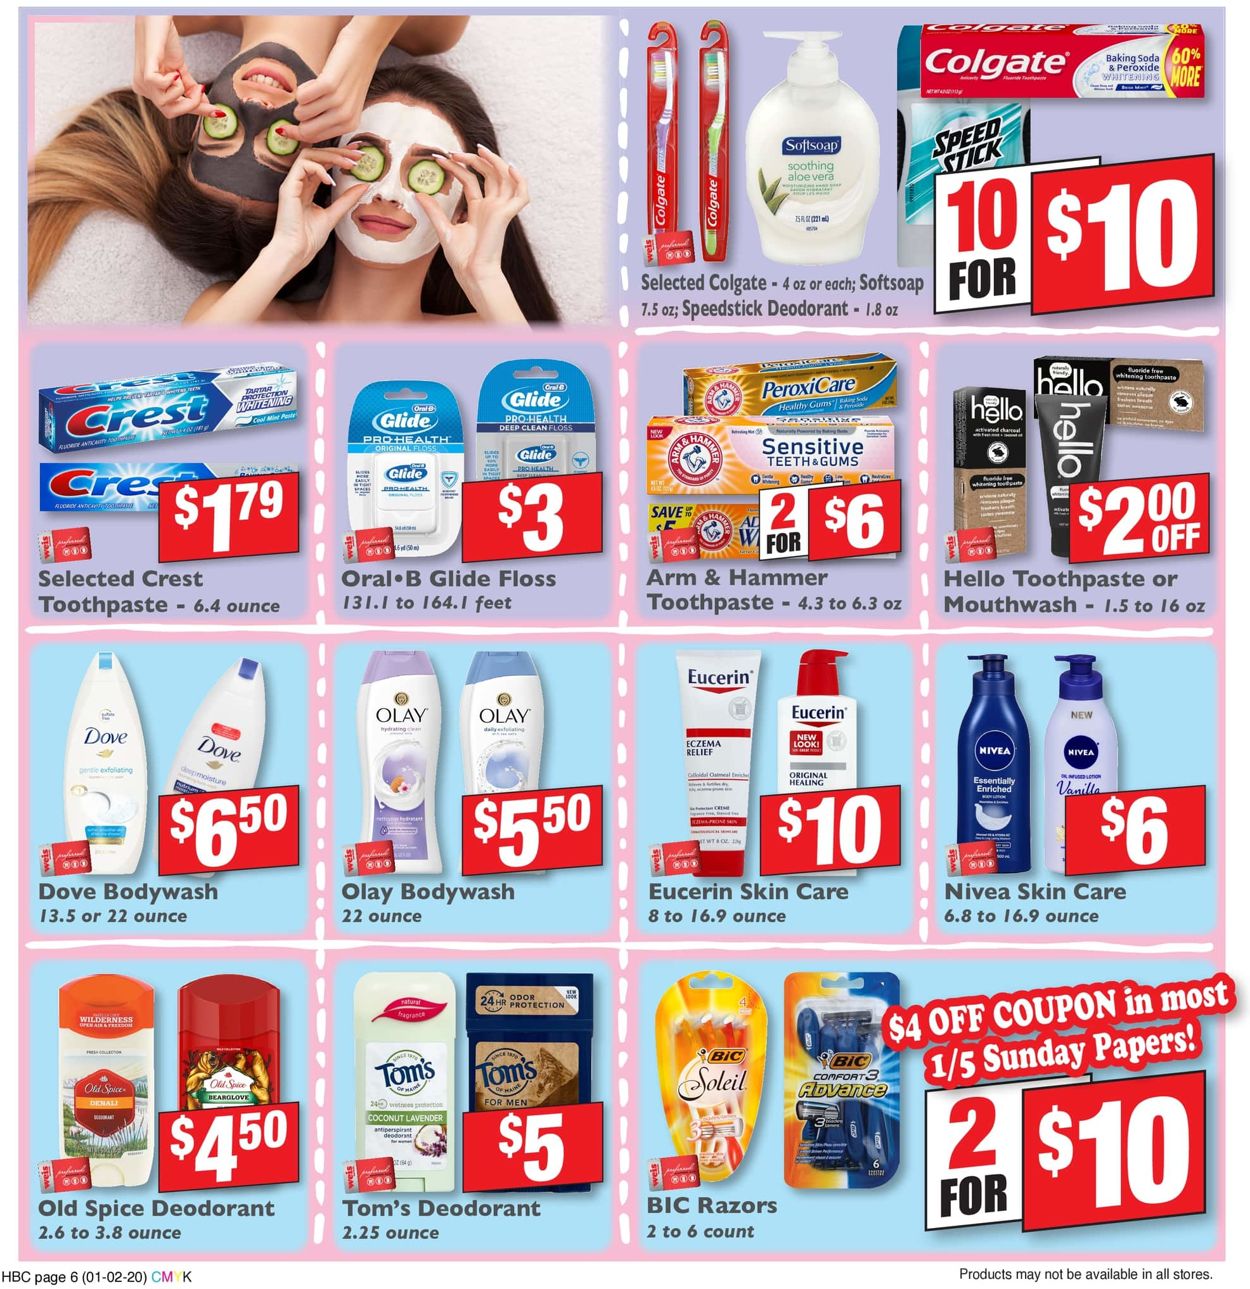 Catalogue Weis from 01/02/2020